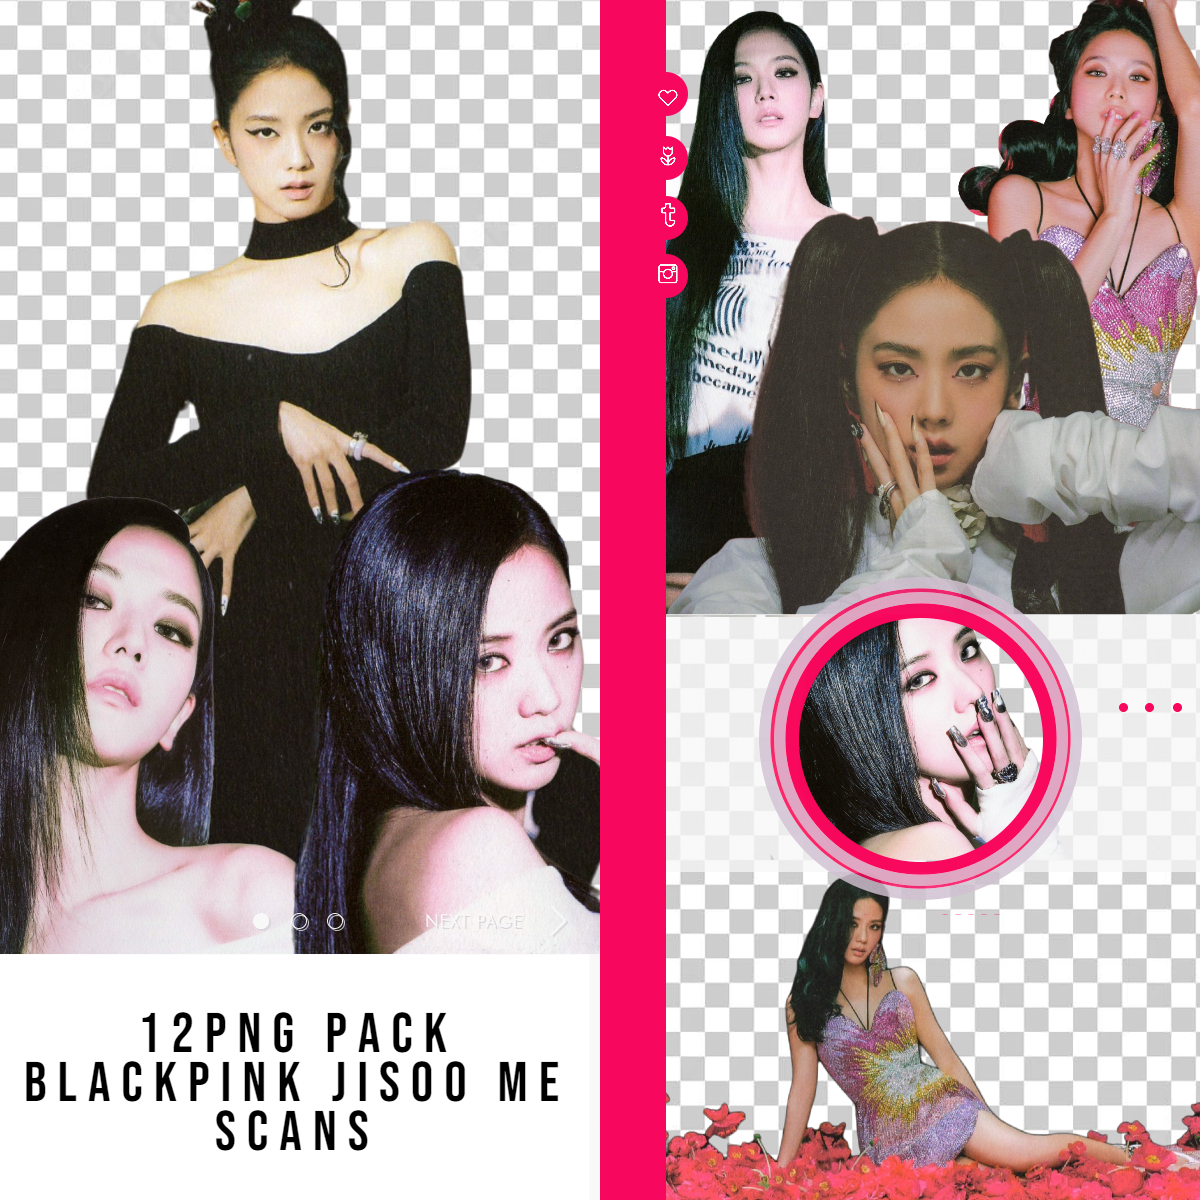 PNG PACK BLACKPINK JISOO X ALO PHOTOS by starcolors13 on DeviantArt